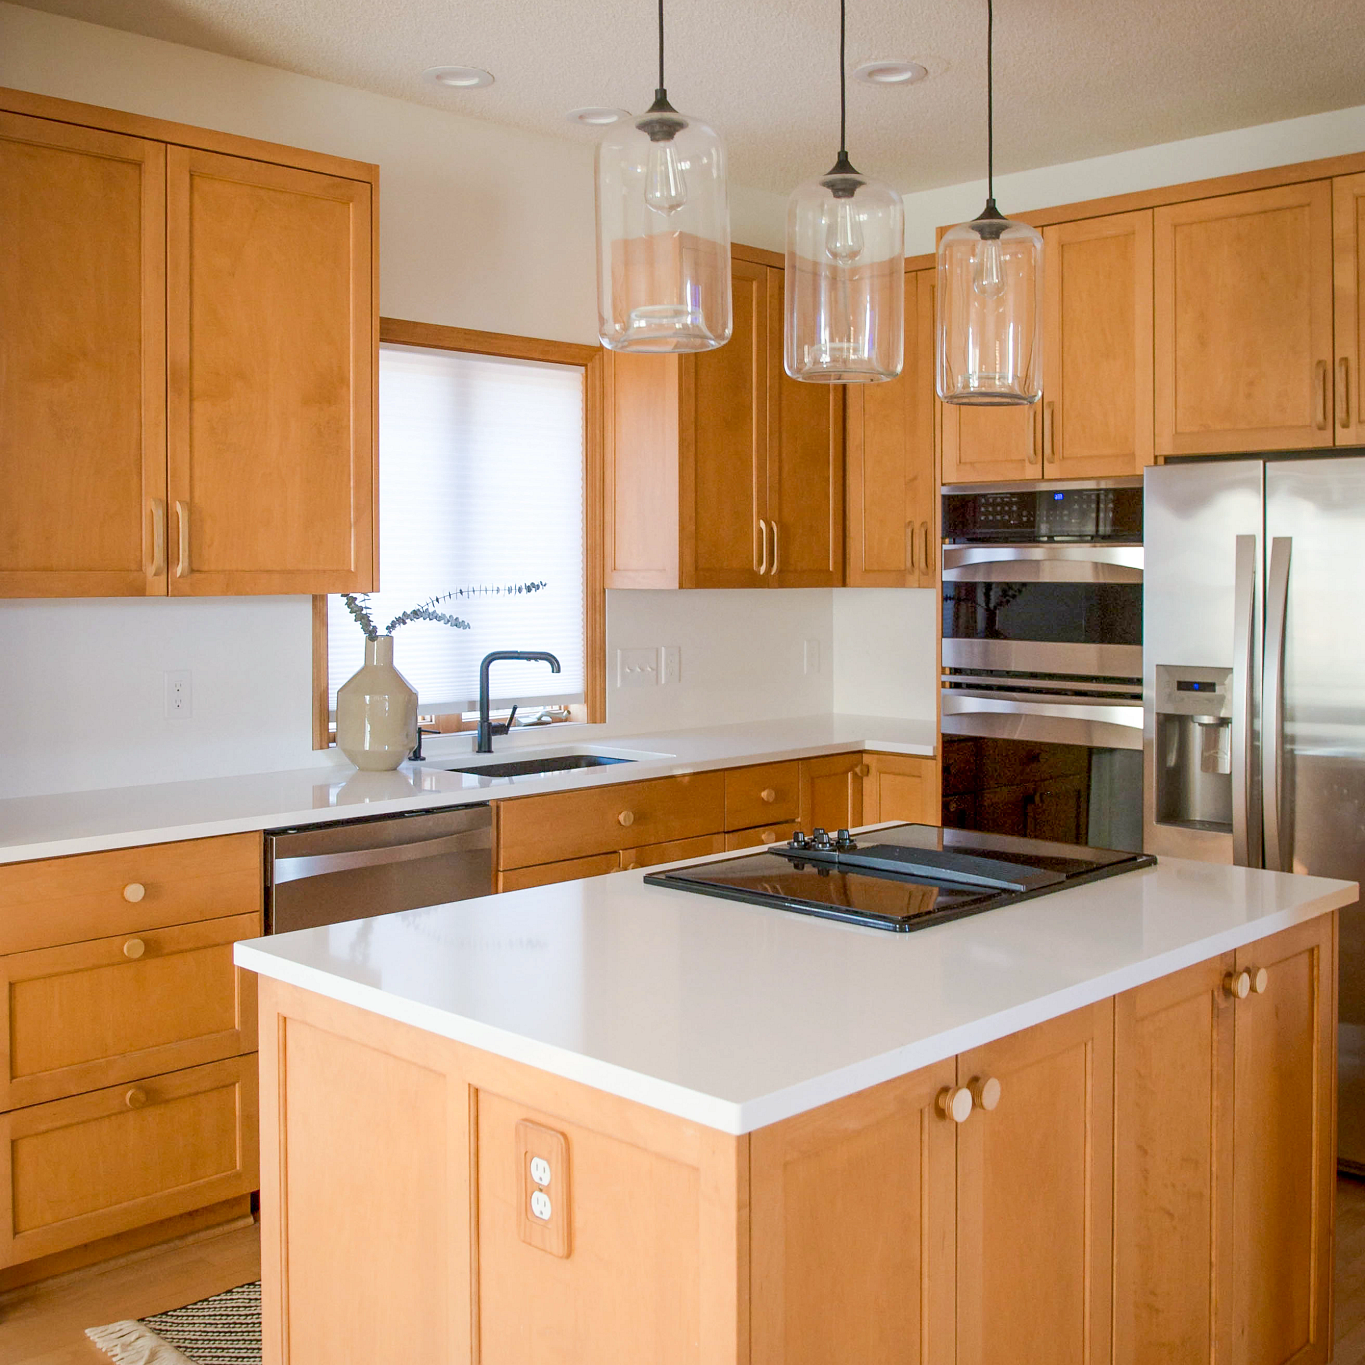 Wood Cabinets With White Countertops, What Color Quartz Countertops Go With Maple Cabinets